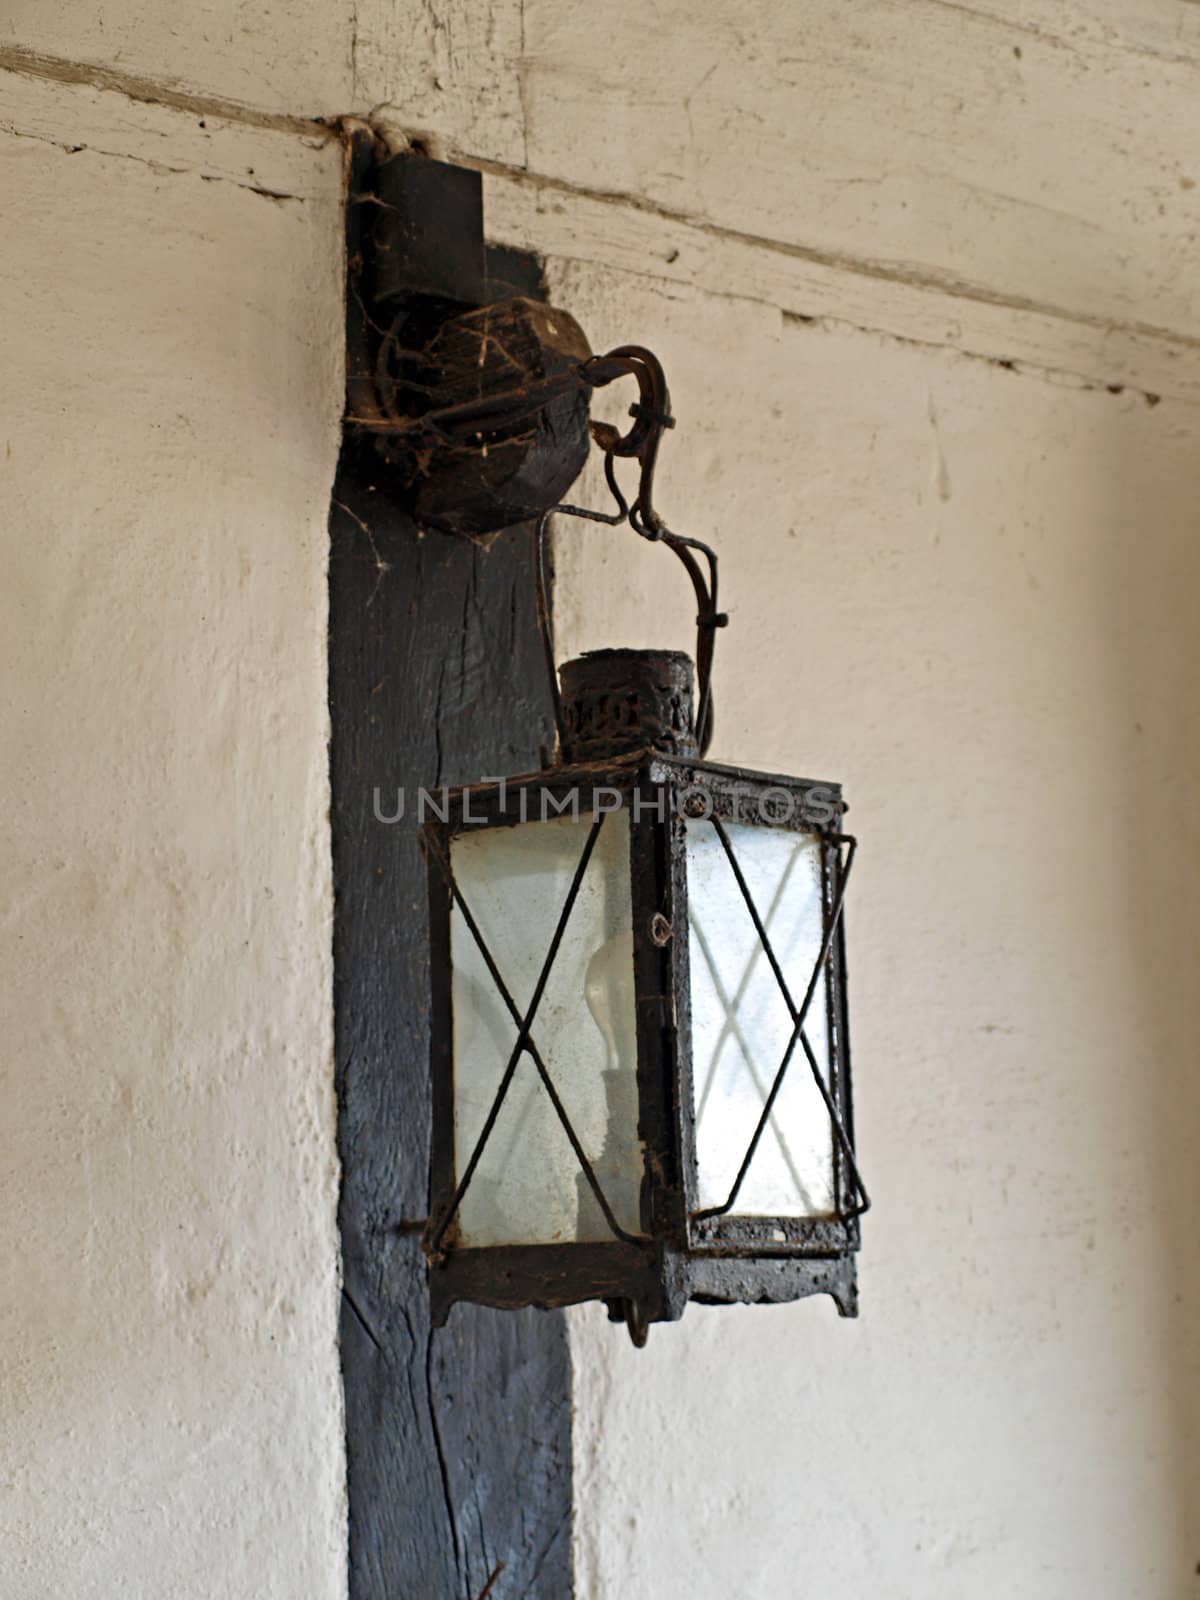 Antique street lamp by Ronyzmbow